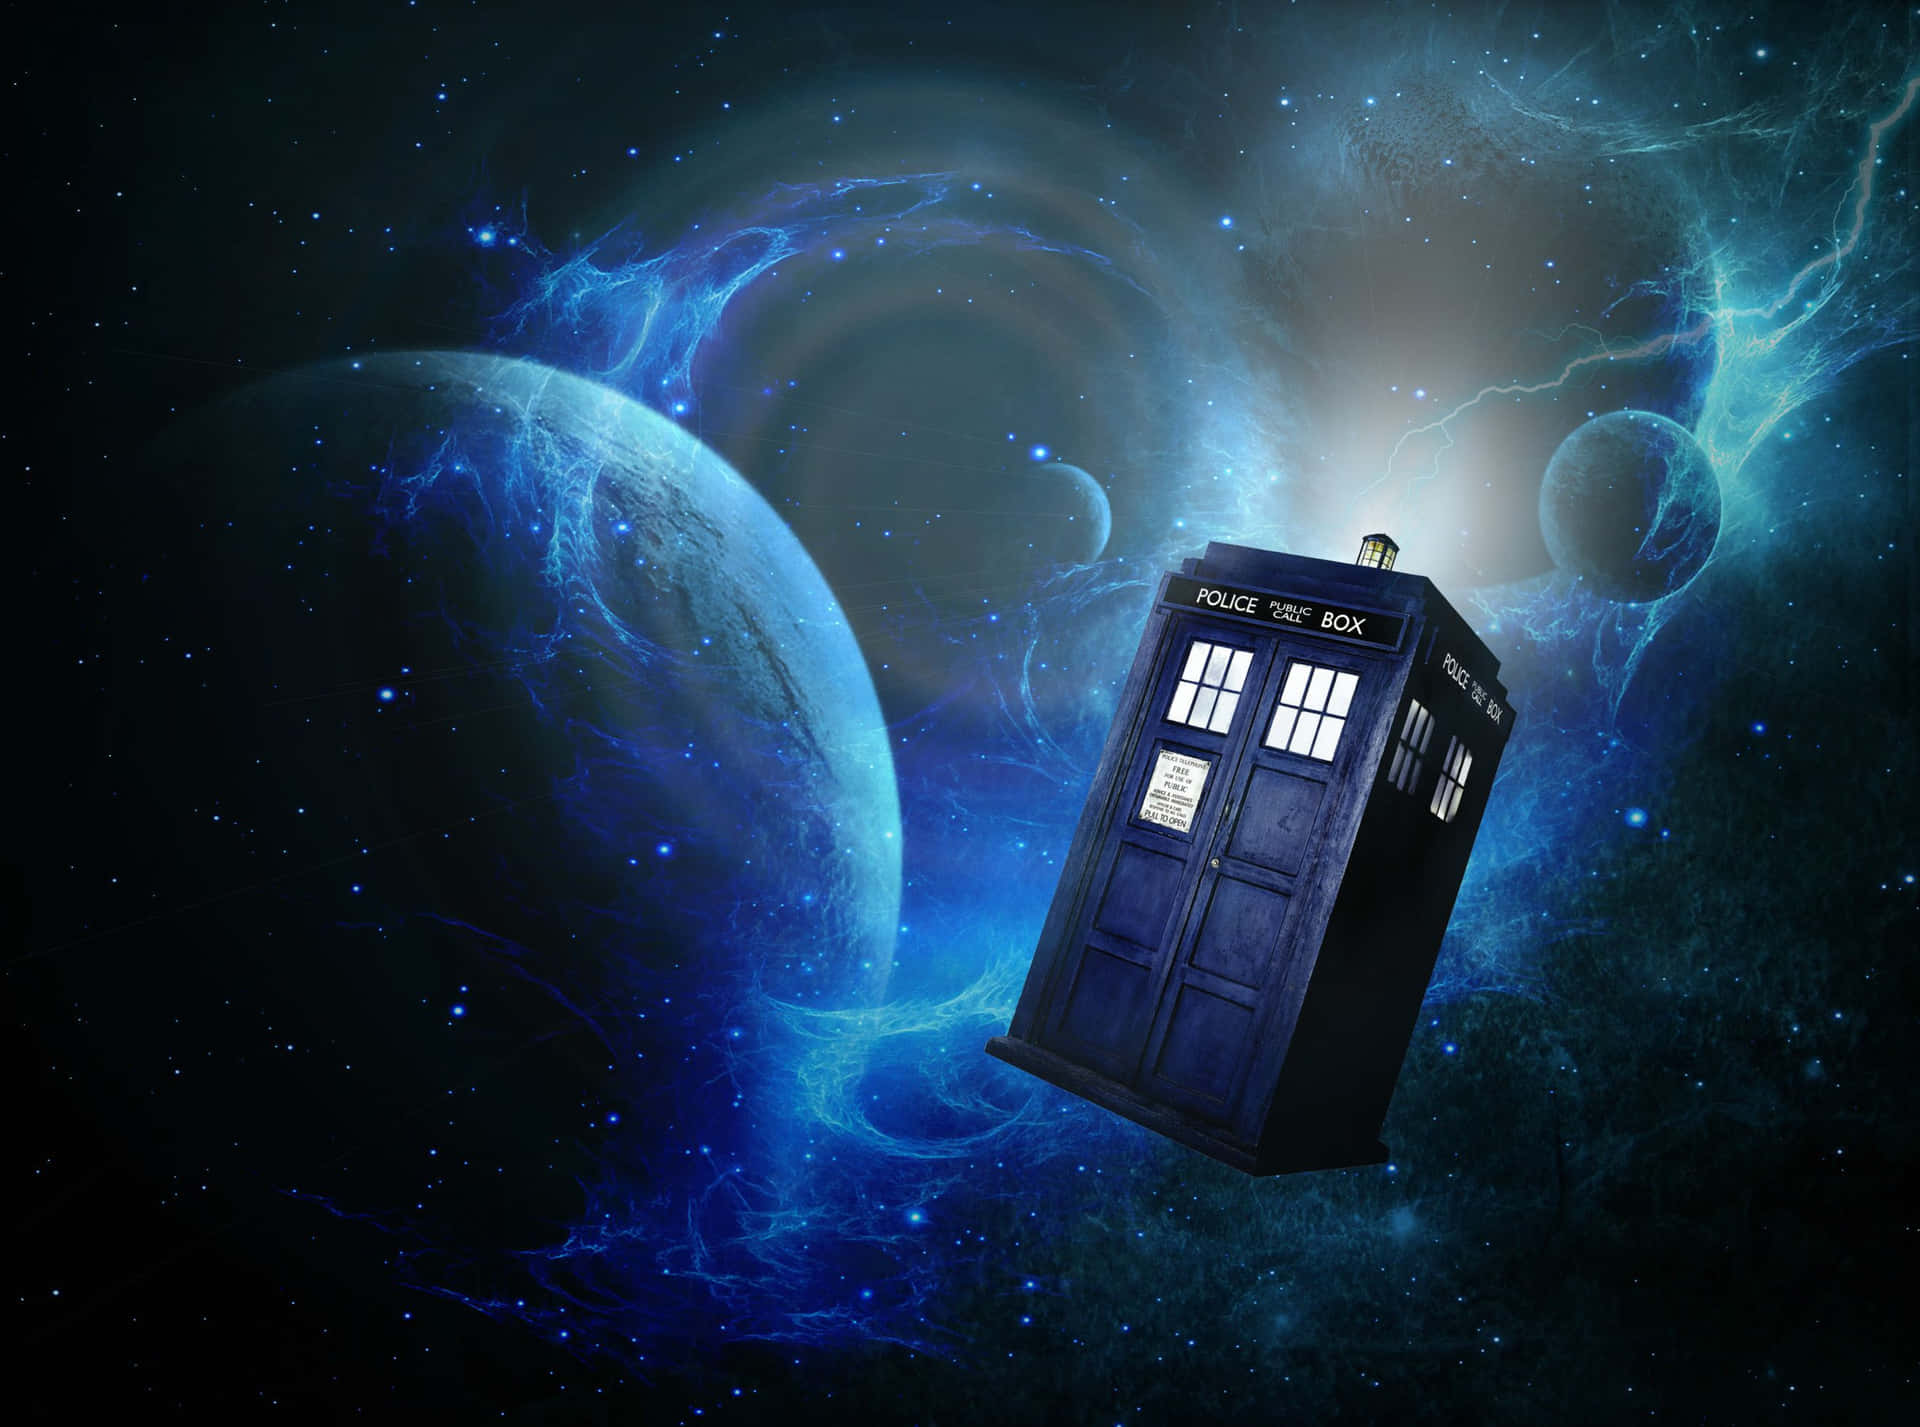 "The Iconic TARDIS - Time and Space at Our Fingertips" Wallpaper